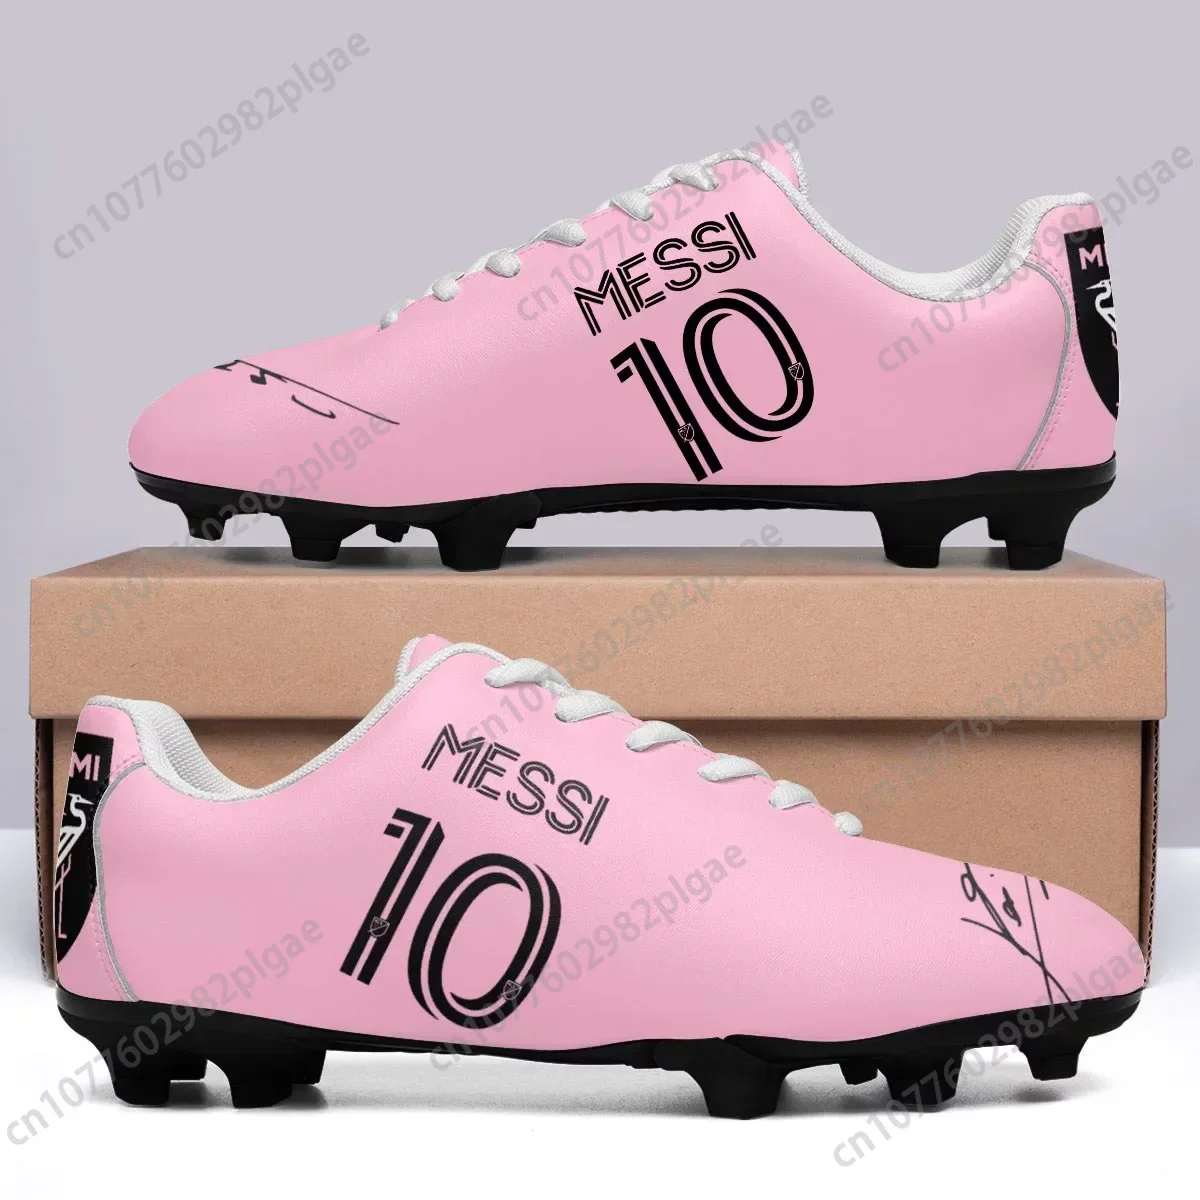 

Miami Messi 10 Logo Argentina Soccer Football Shoes Customizd Mens Womens Sports Running Customization Leather Flats Sneakers